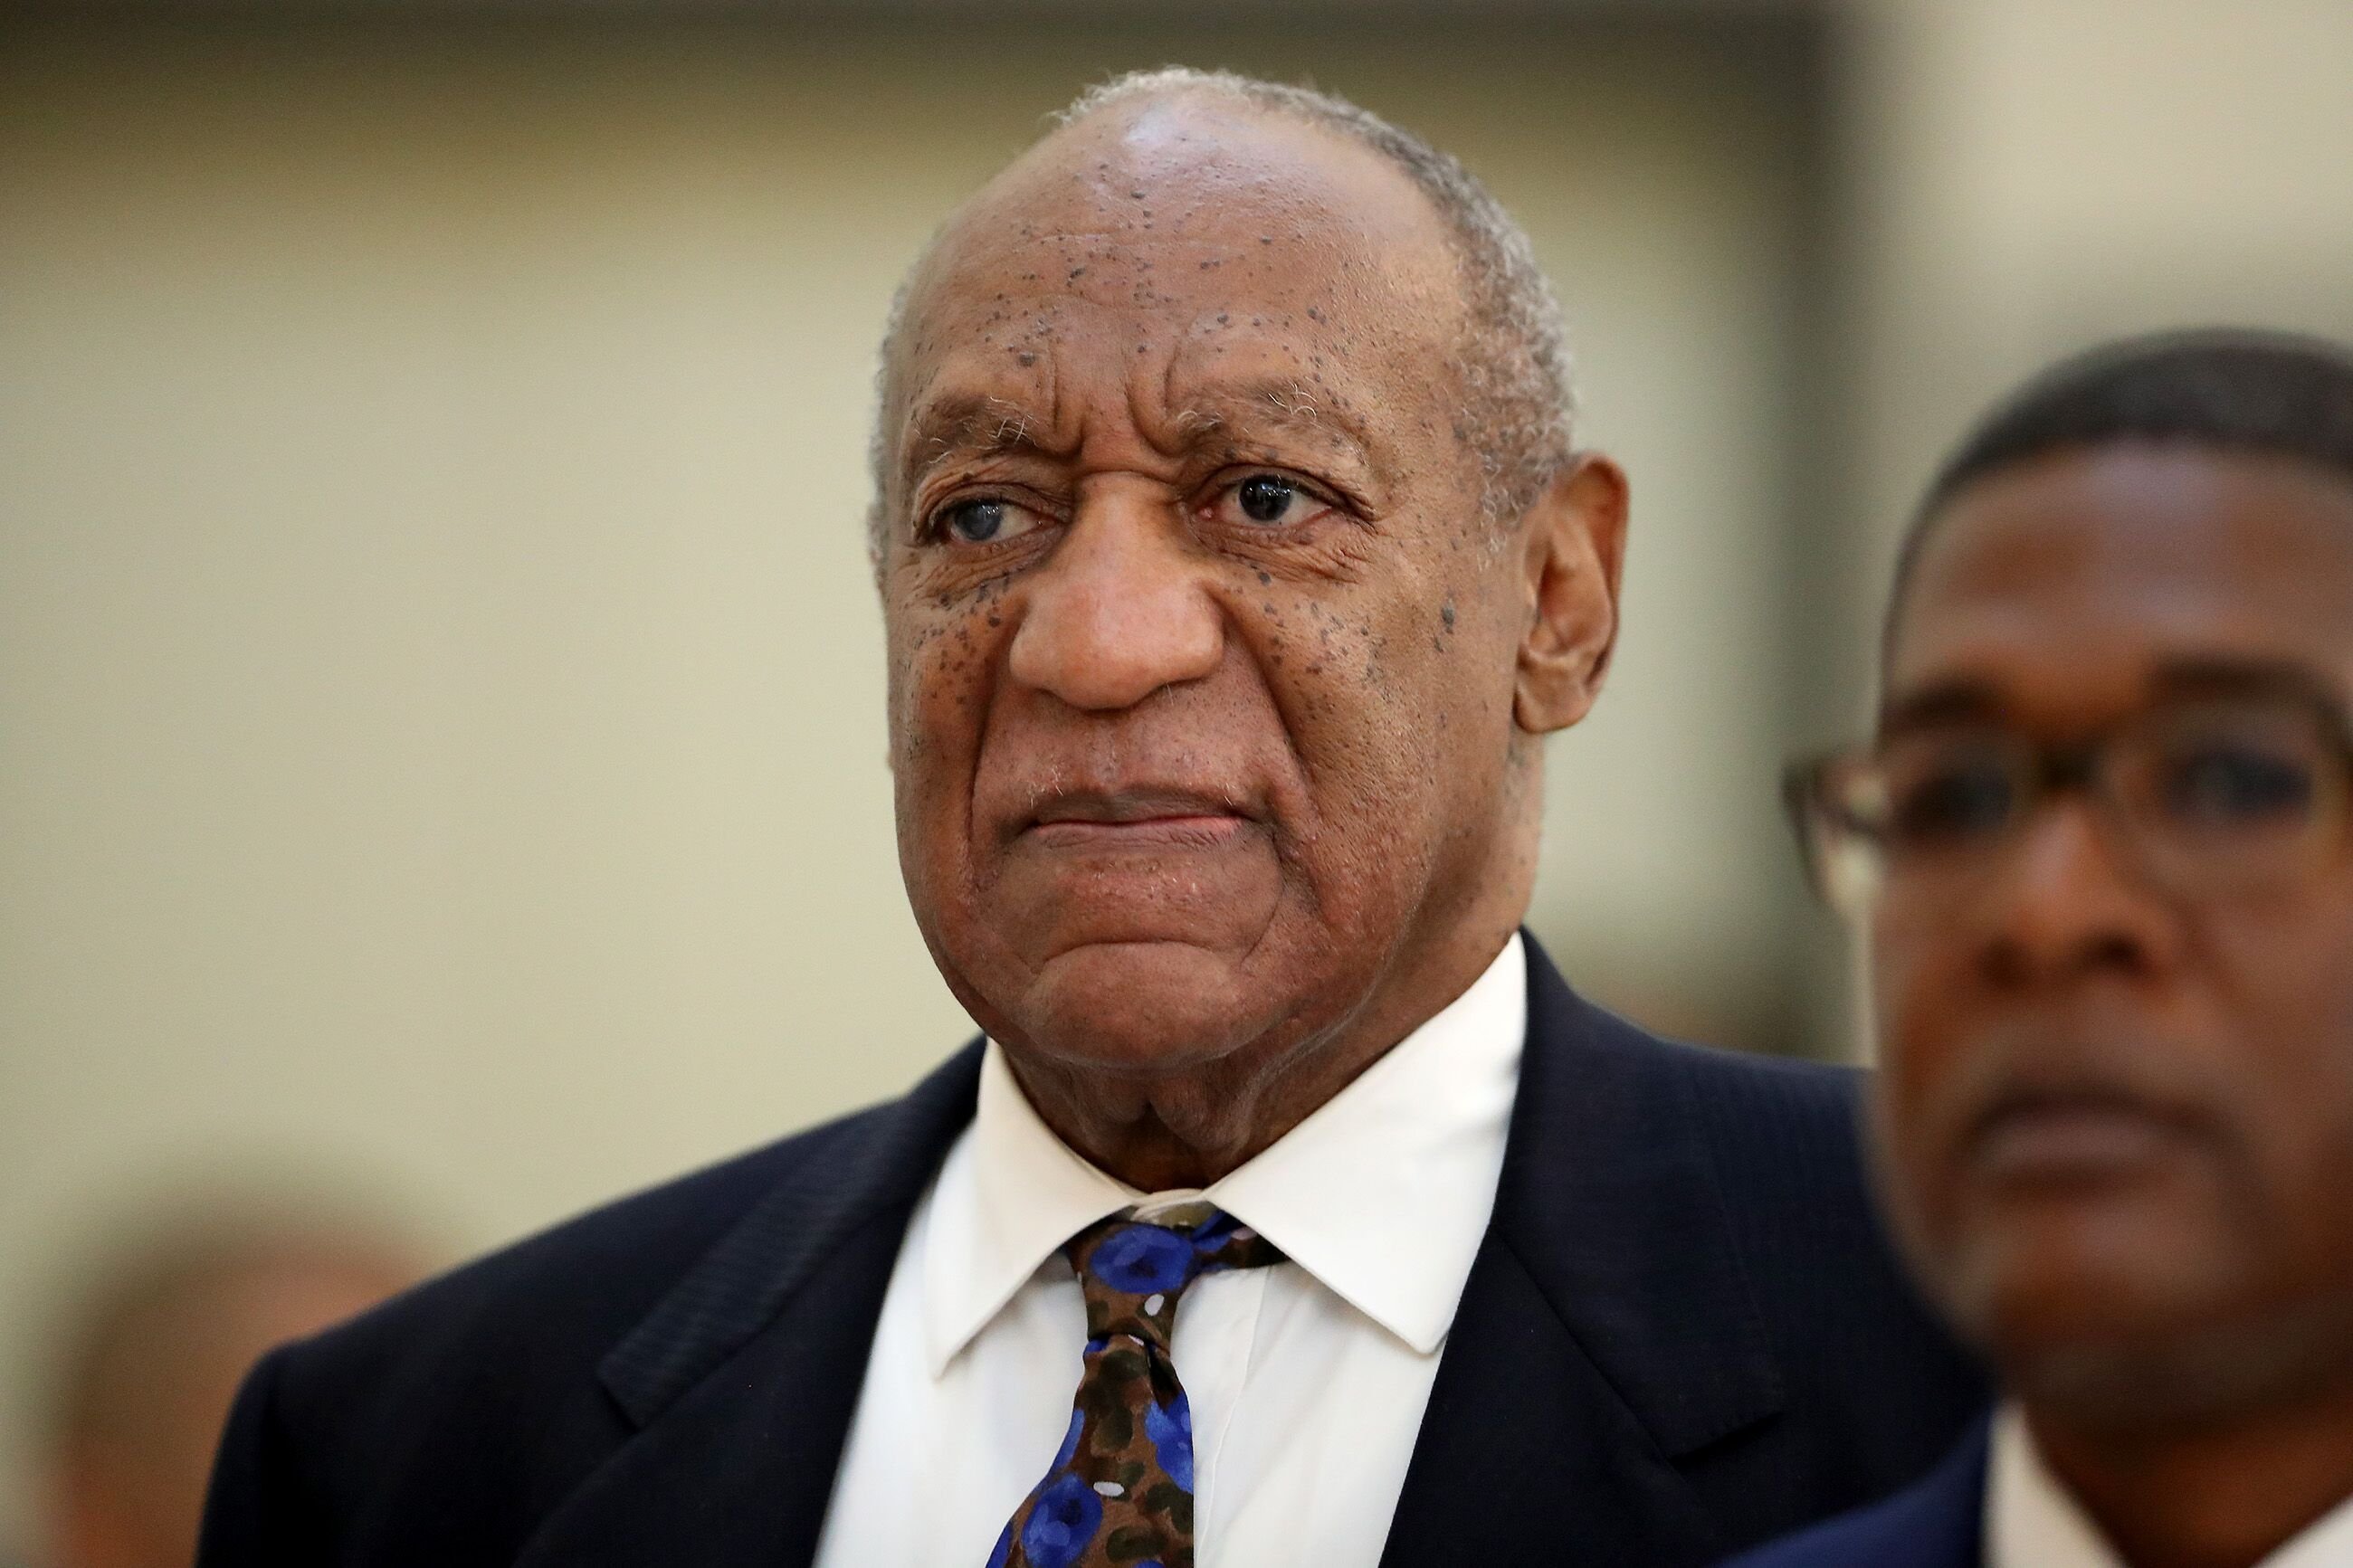 Bill Cosby arrives for his sentencing at the Montgomery County Courthouse. | Source: Getty Images